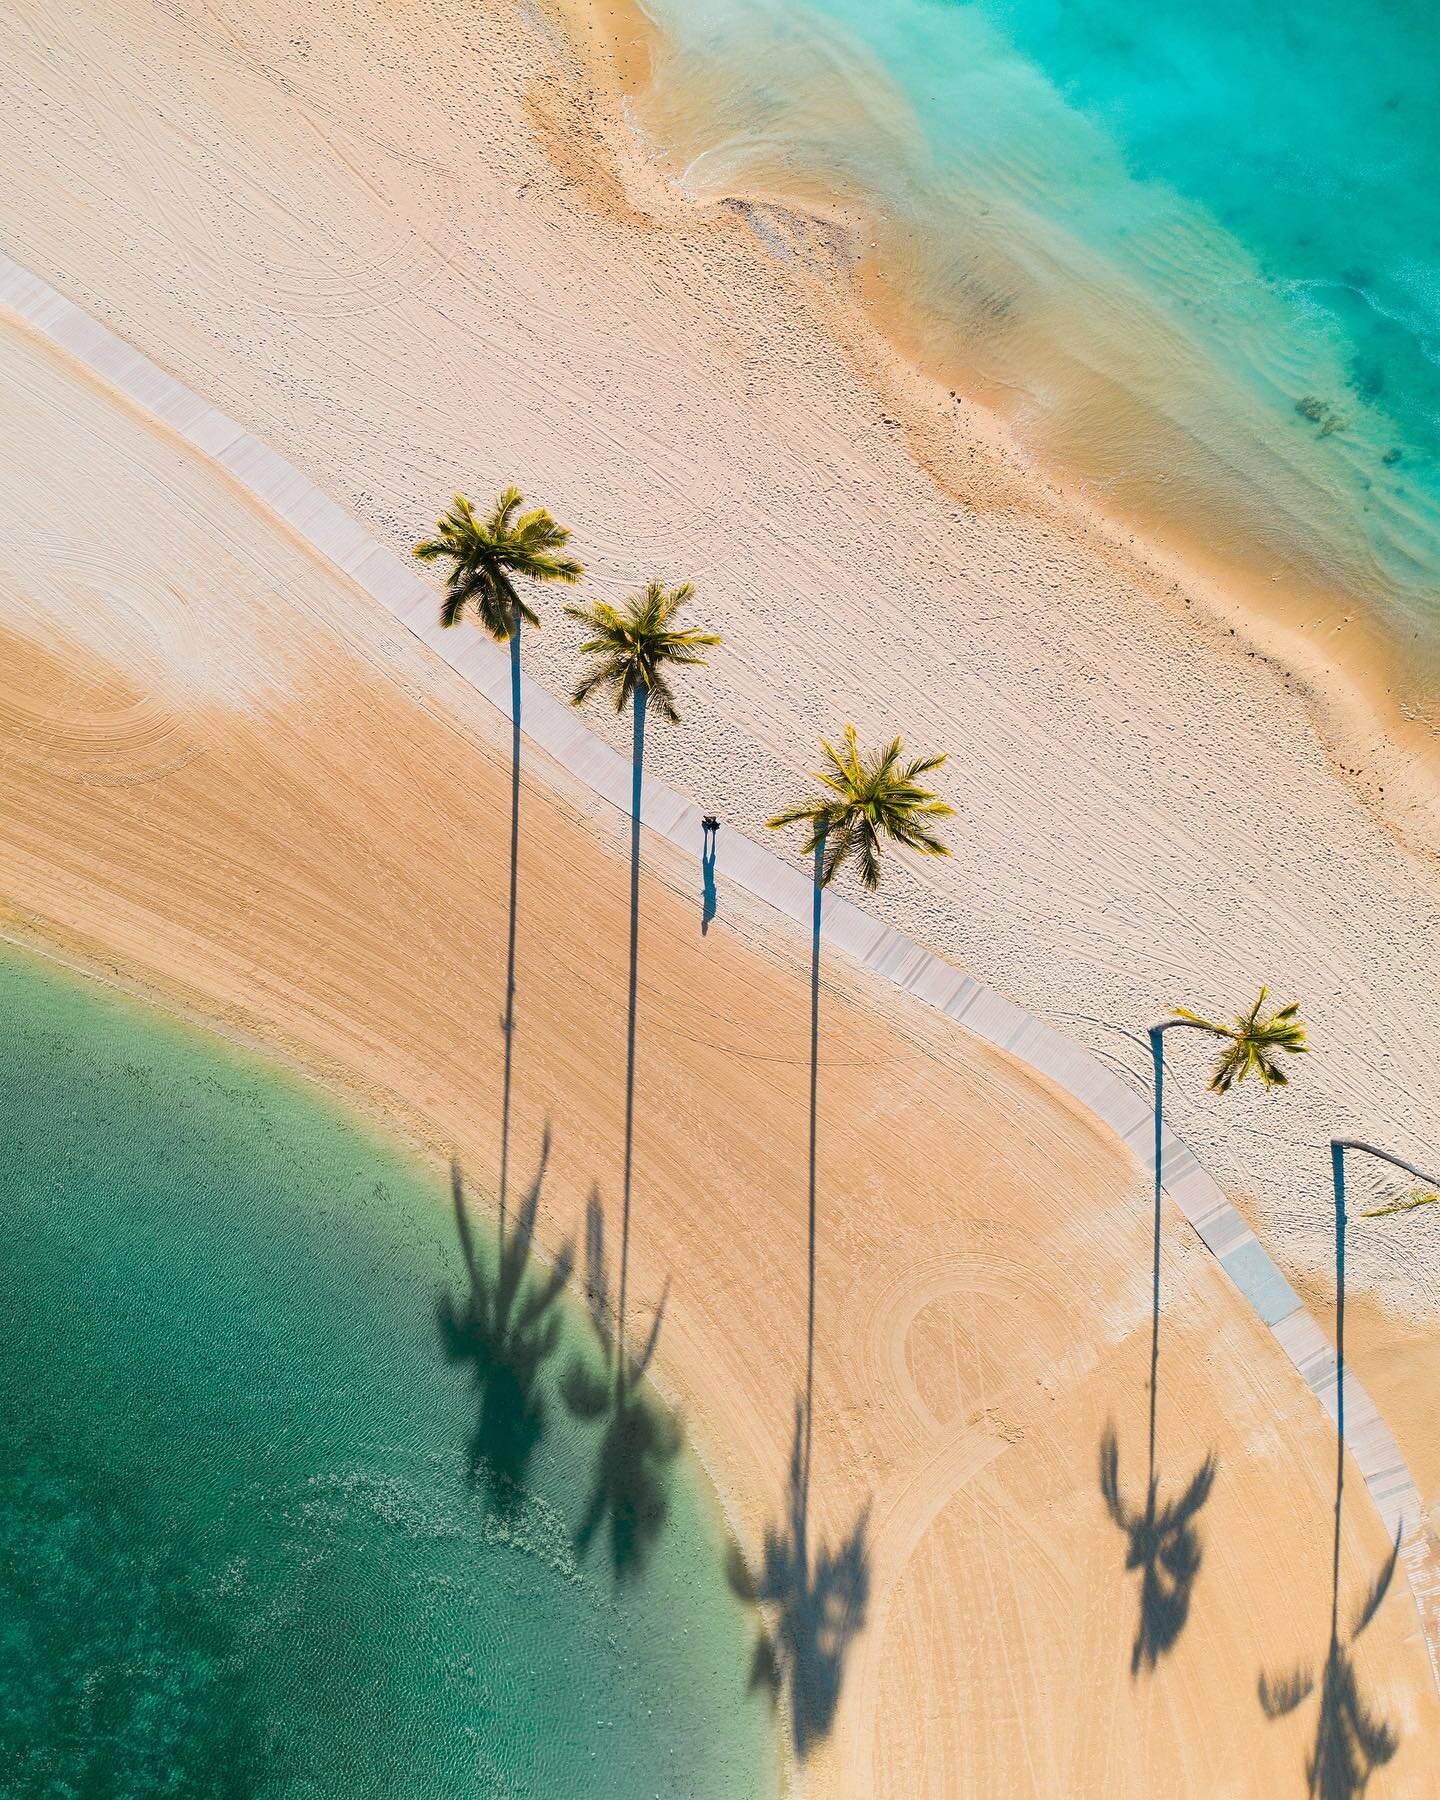 One of my favorites drone shots. I love looking at shots from the sky and seeing things from a whole new perspective. Places you've seen hundreds of times can look completely different.
.
 #hawaii #oahu #drone #aerial #lookdown #beach #palmtrees